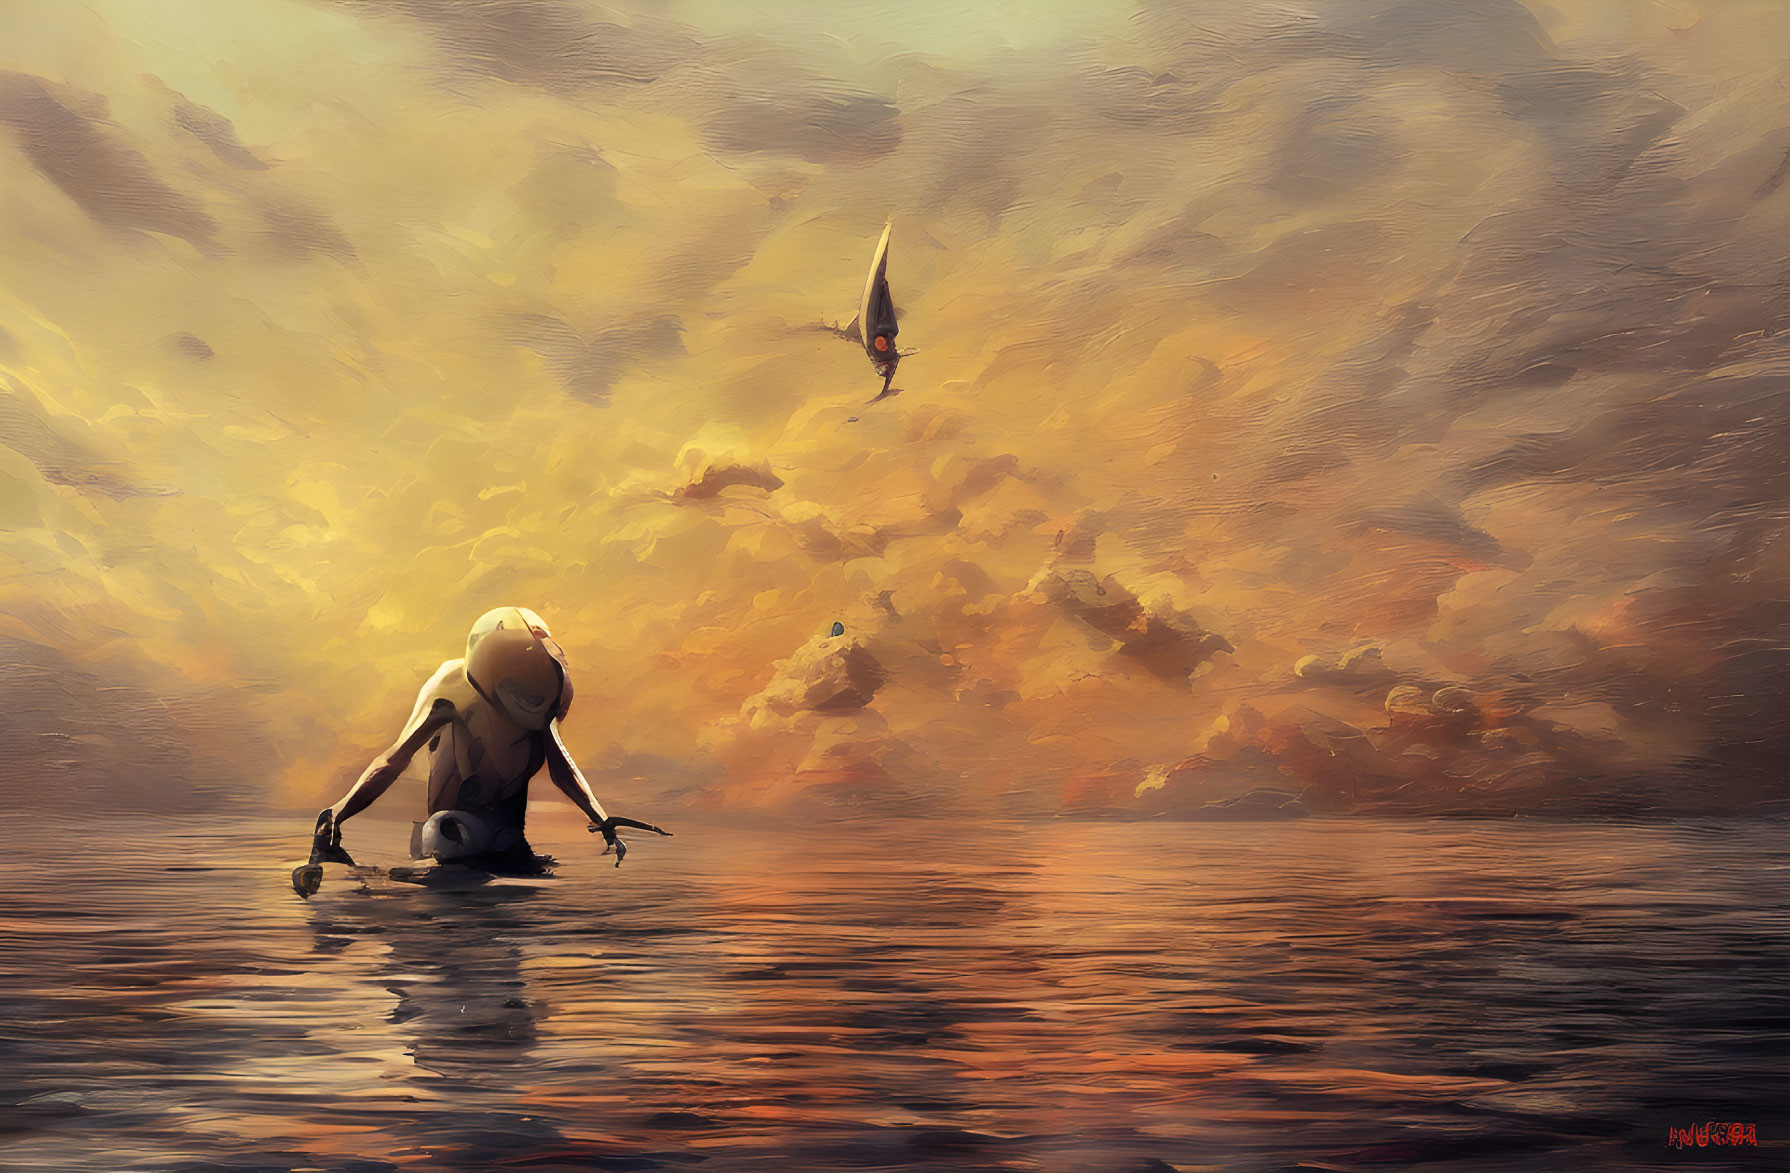 Tranquil figure in water under golden sky with soaring bird